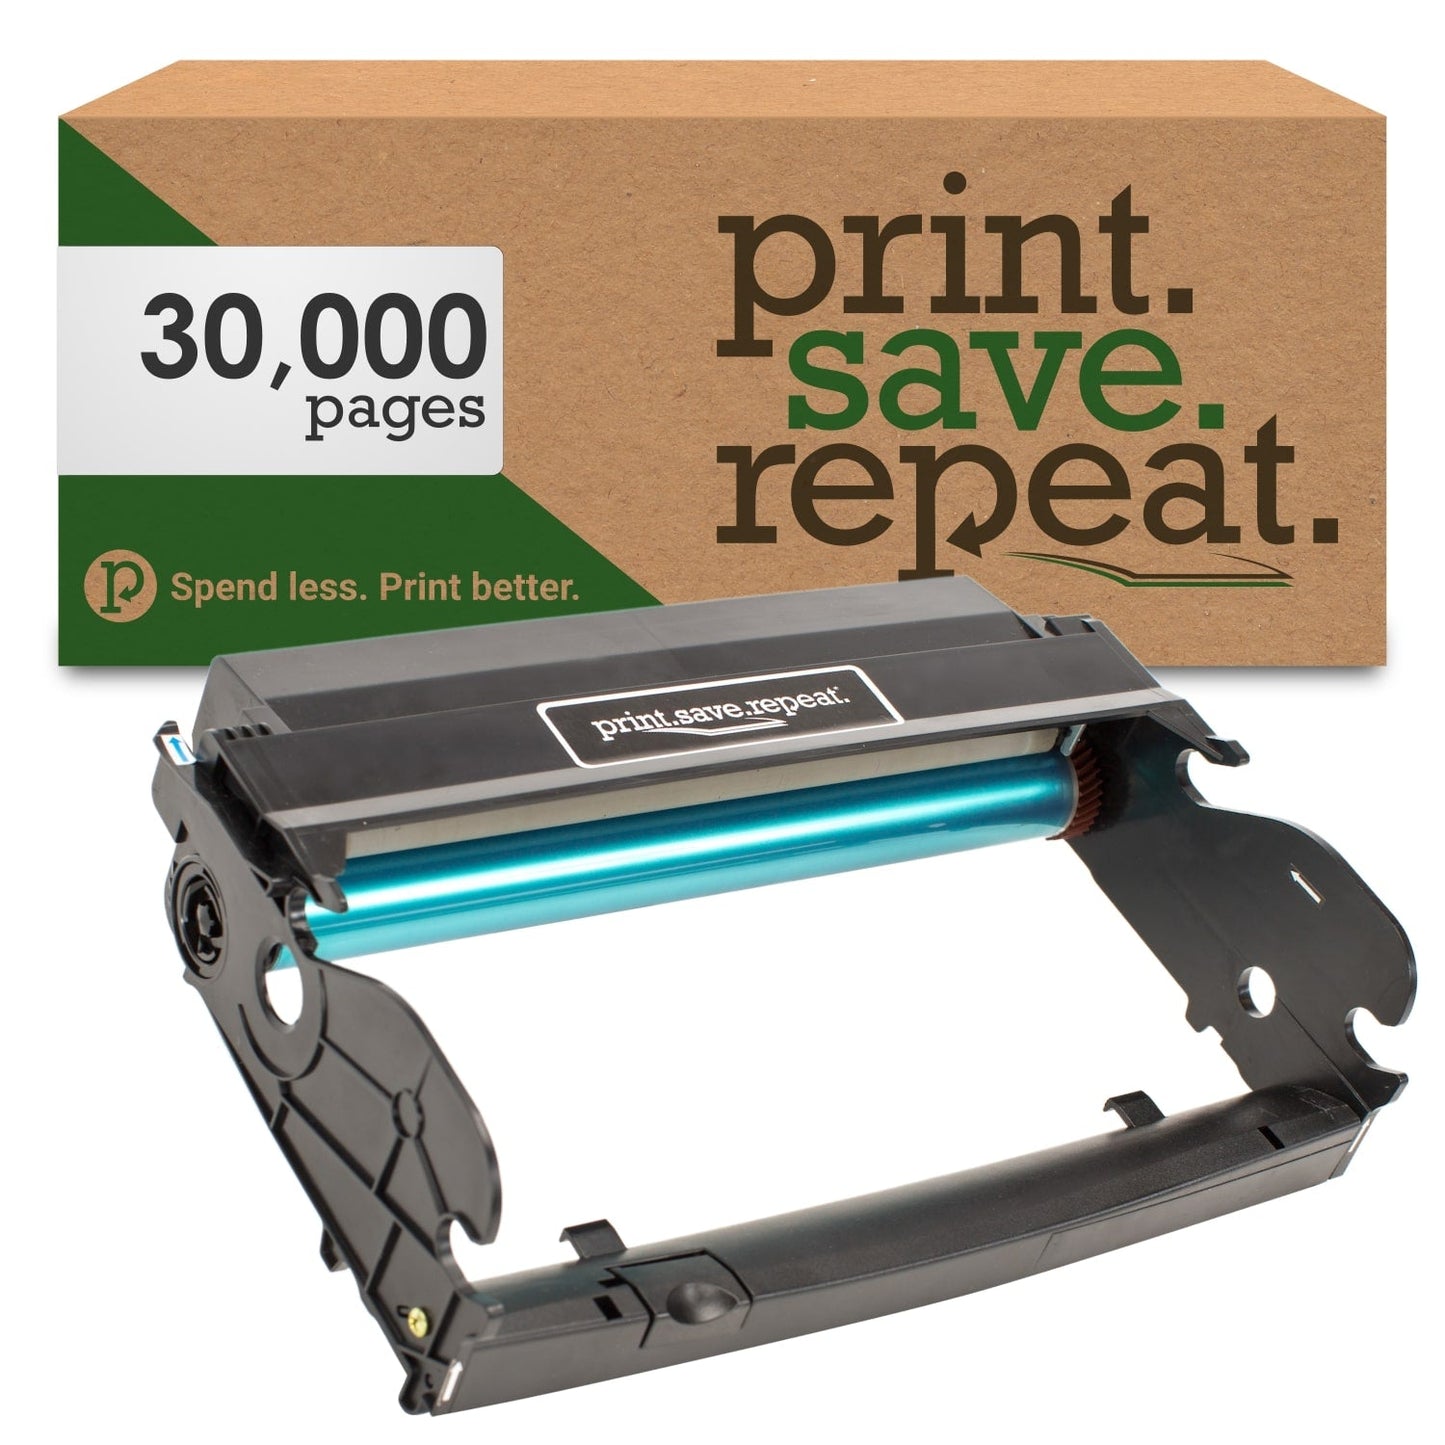 Print.Save.Repeat. Dell PK496 Remanufactured Imaging Drum for 2230, 2330, 2350, 3330, 3333, 3335 [30,000 Pages]